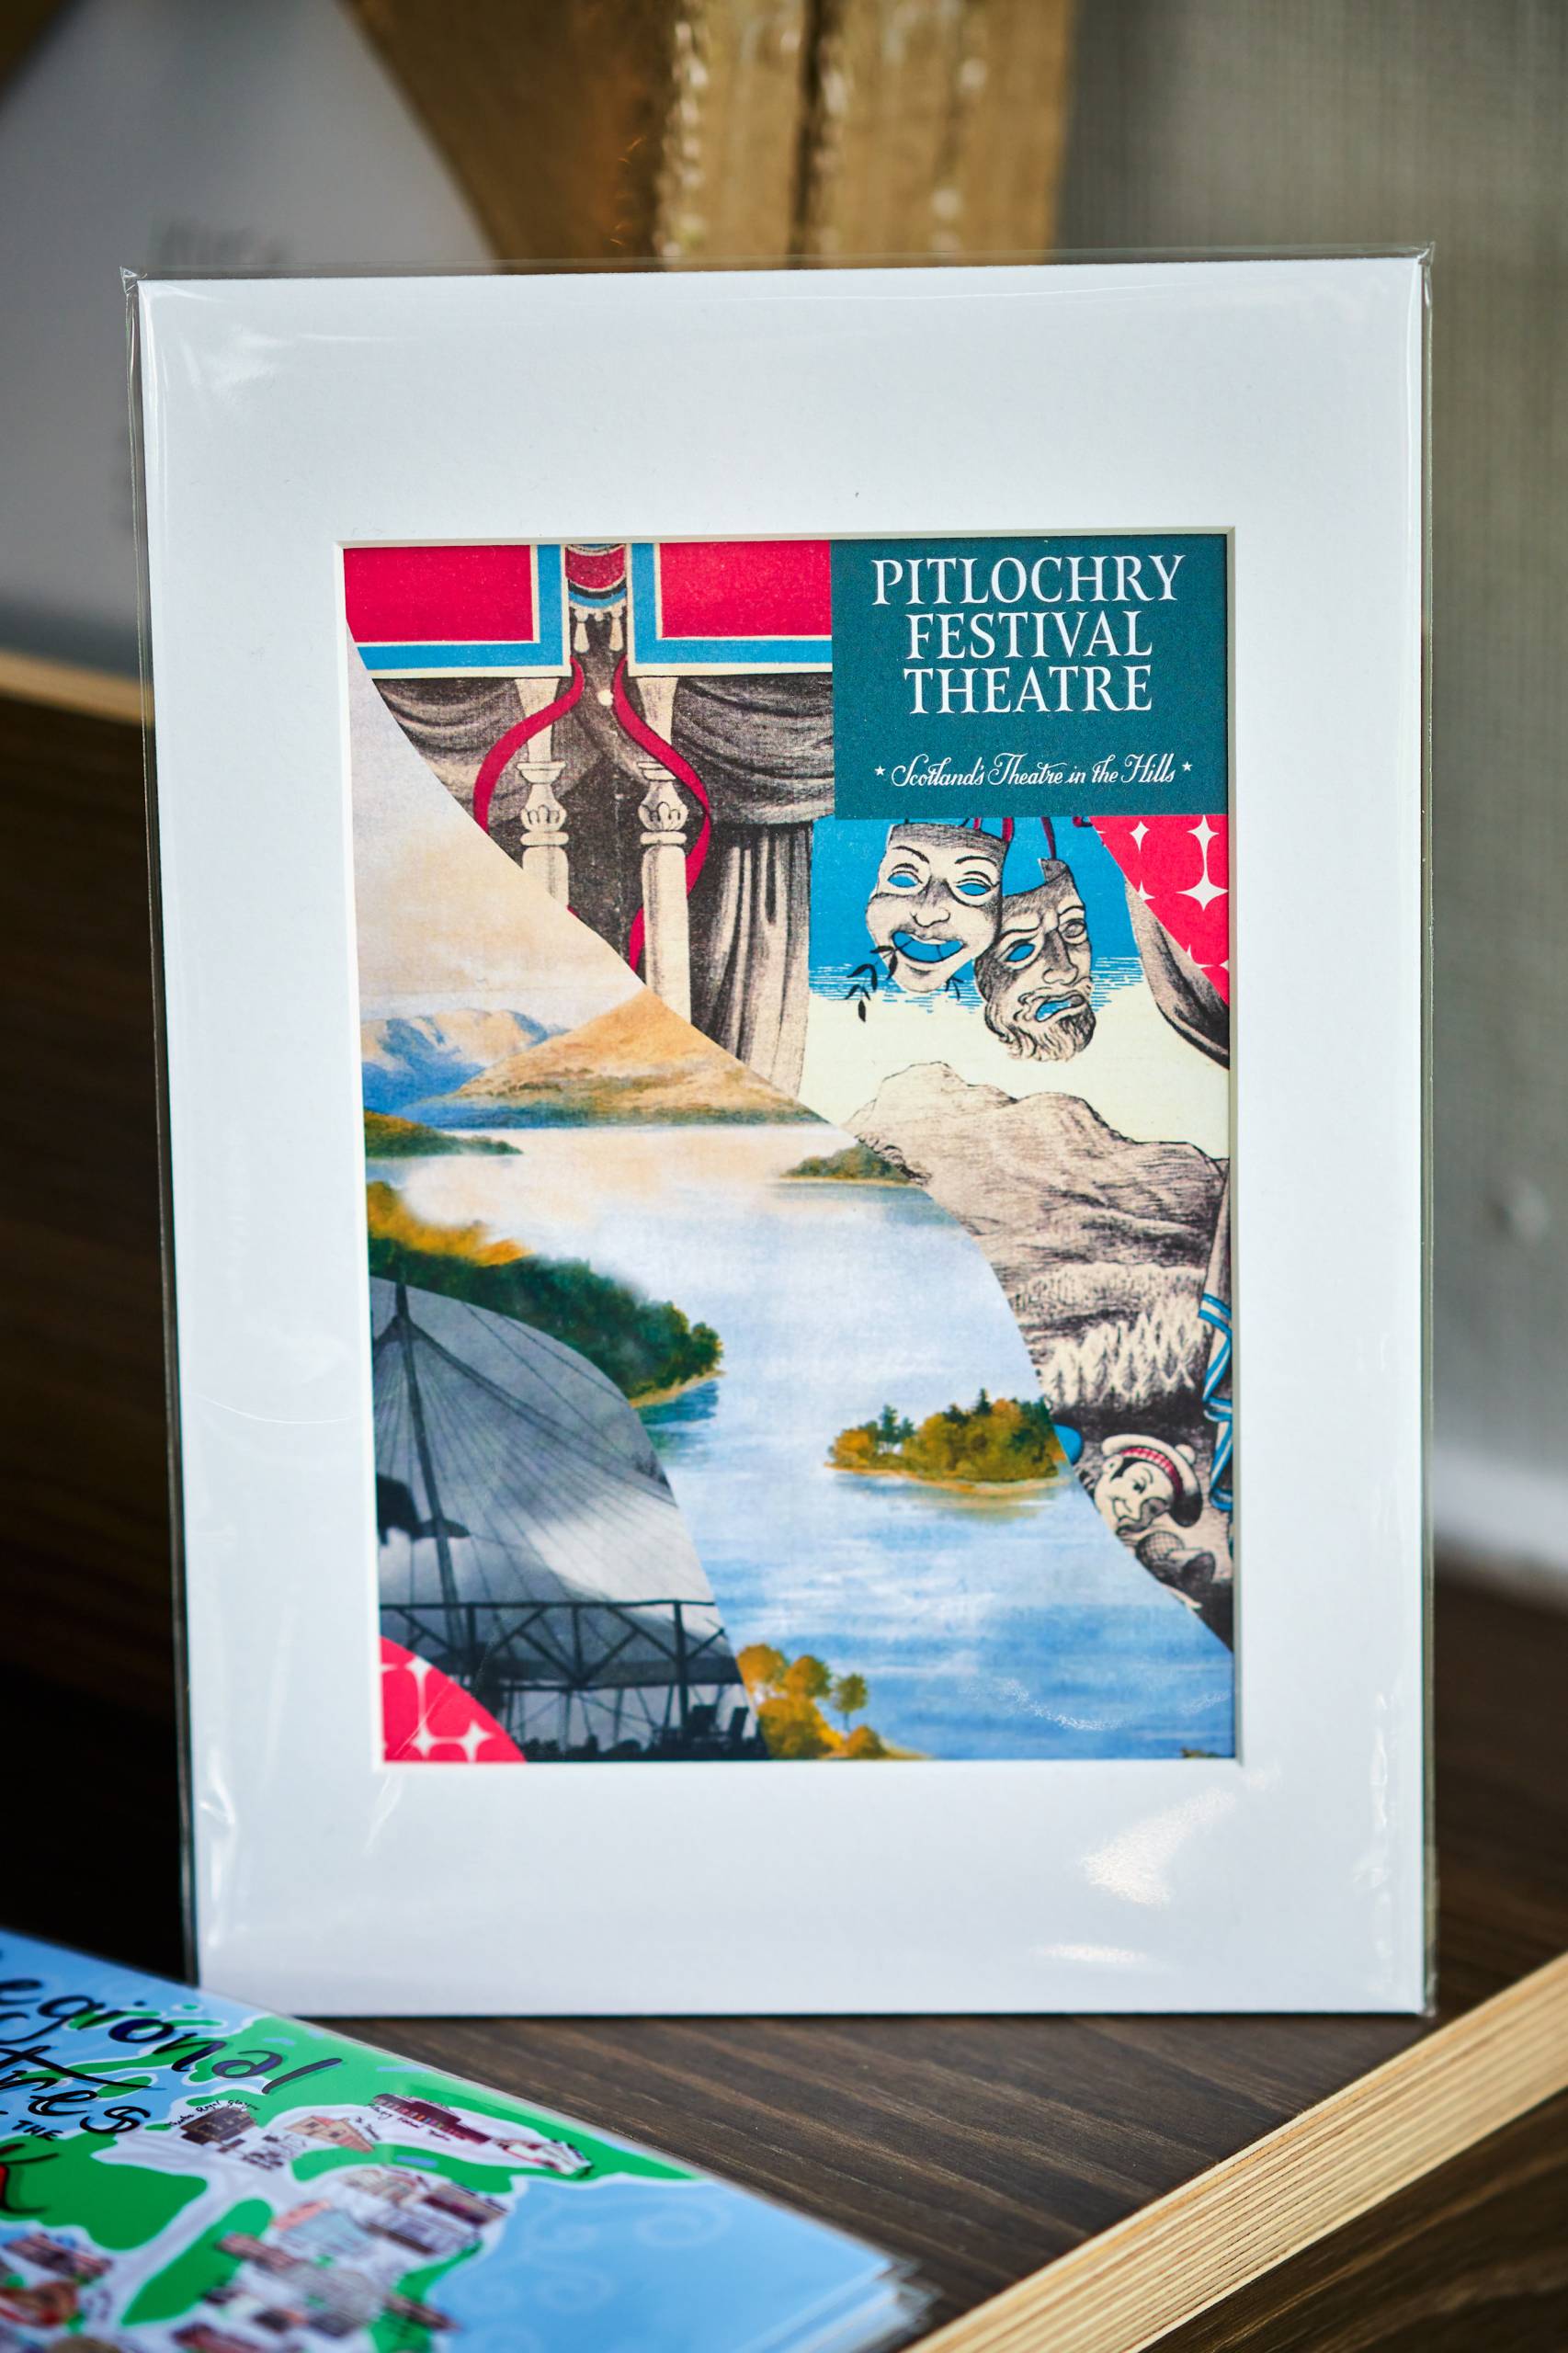 A card sat on a table with the words pitlochry festival theatre on it as well as the laughing and crying theatre faces